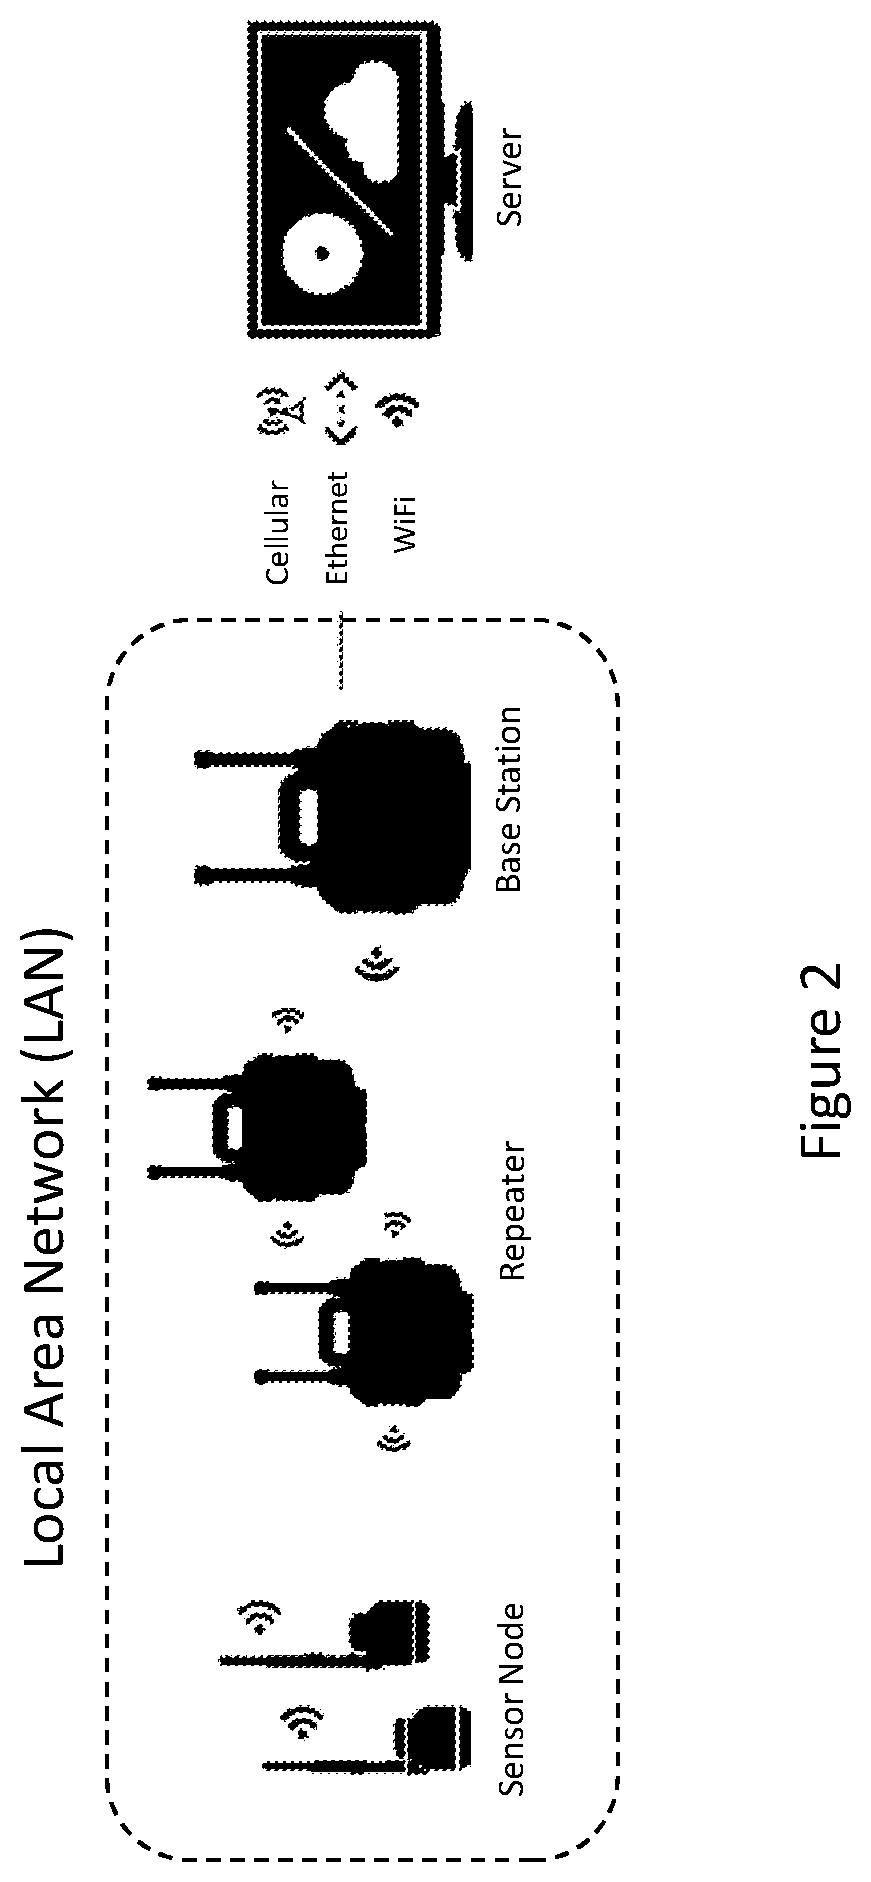 Compression method for resource constrained local area networks